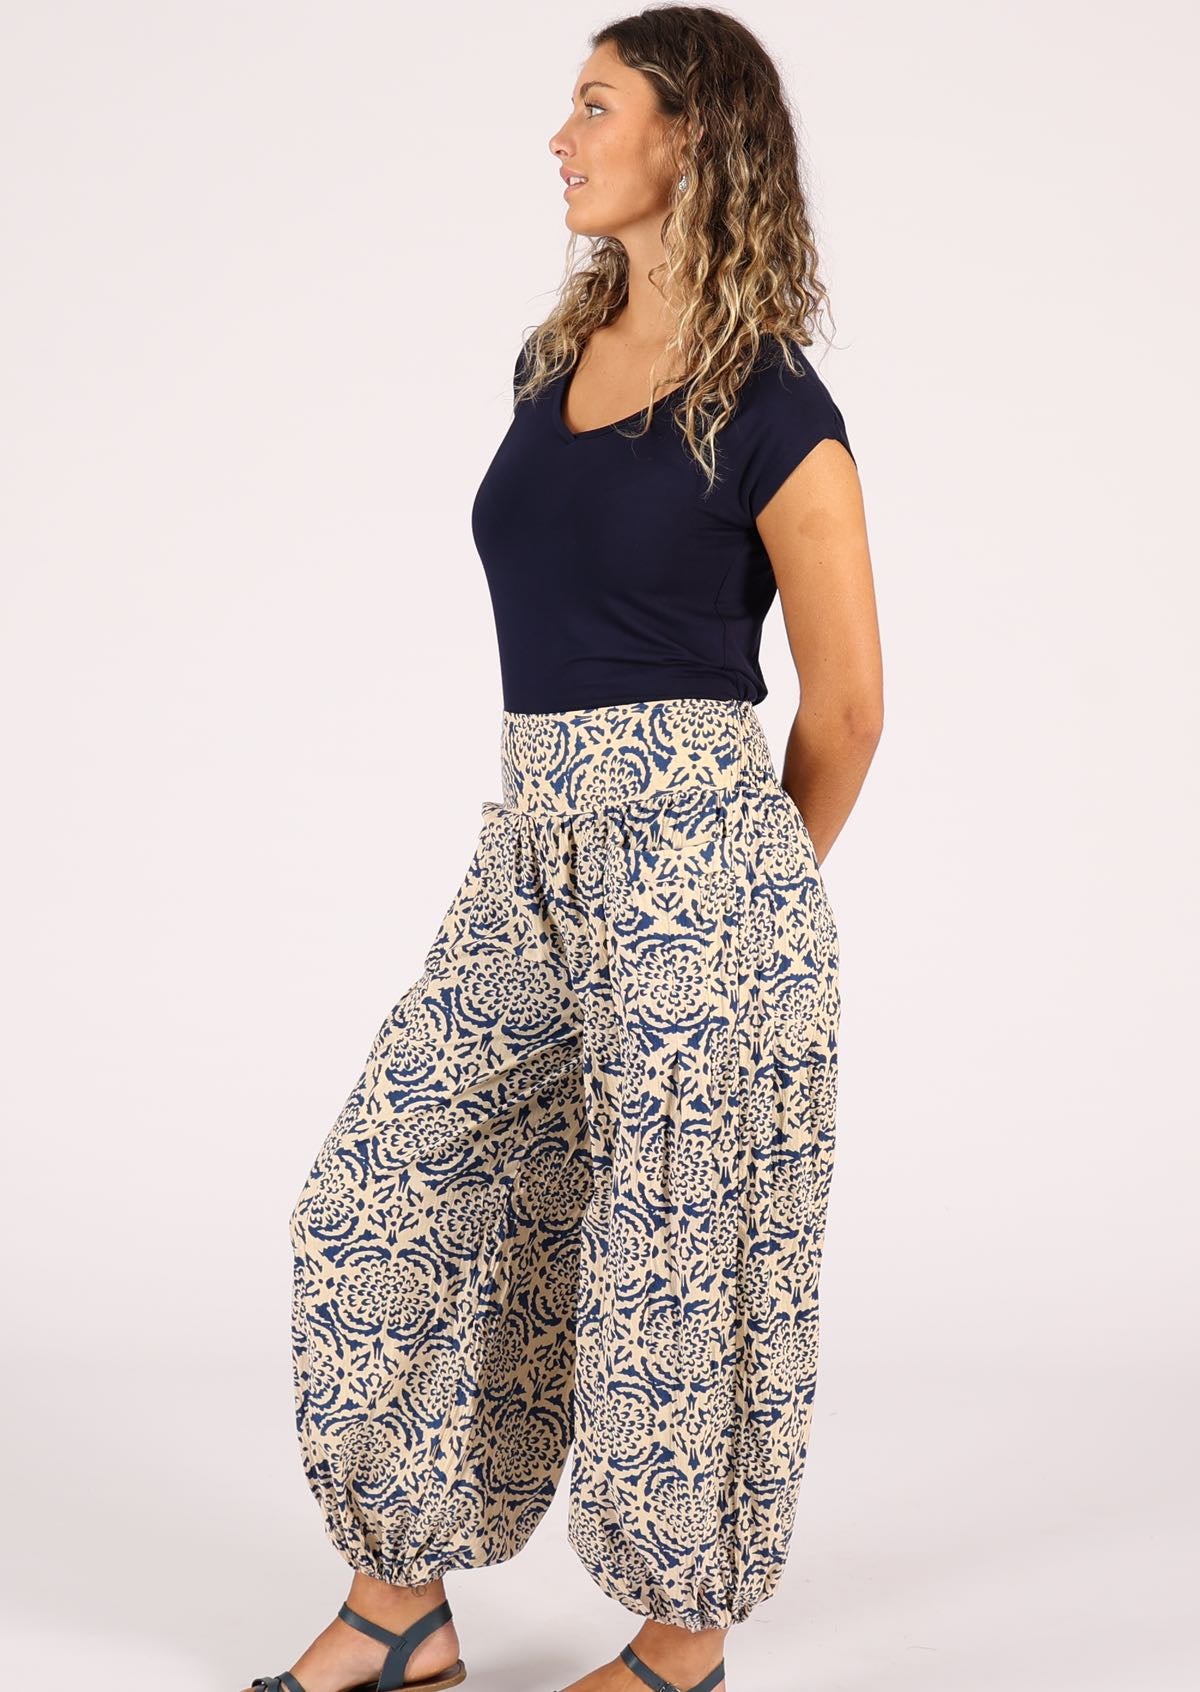 Cotton harem pants with elastic at back of waistband